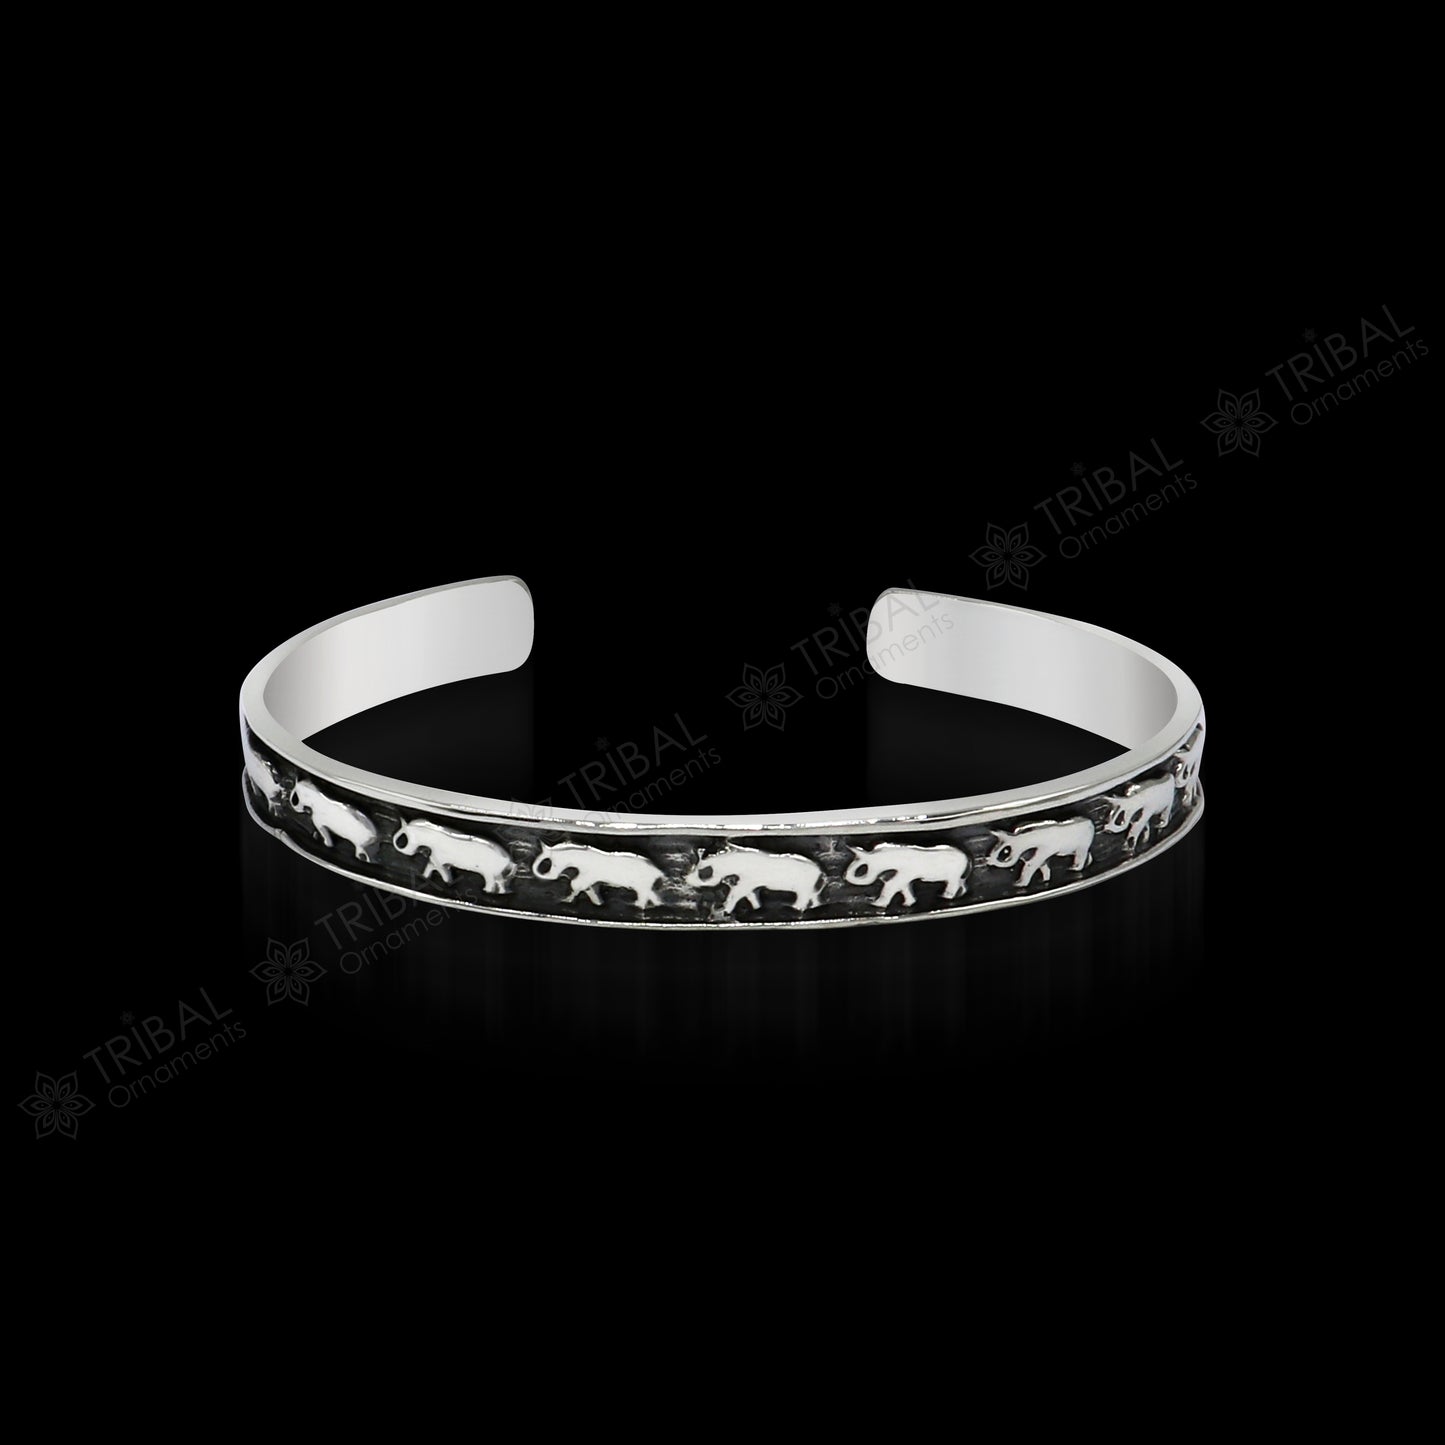 925 sterling silver gorgeous waved elephant design open face bangle bracelet cuff bracelet exclusive gifting jewelry  to her cuff121